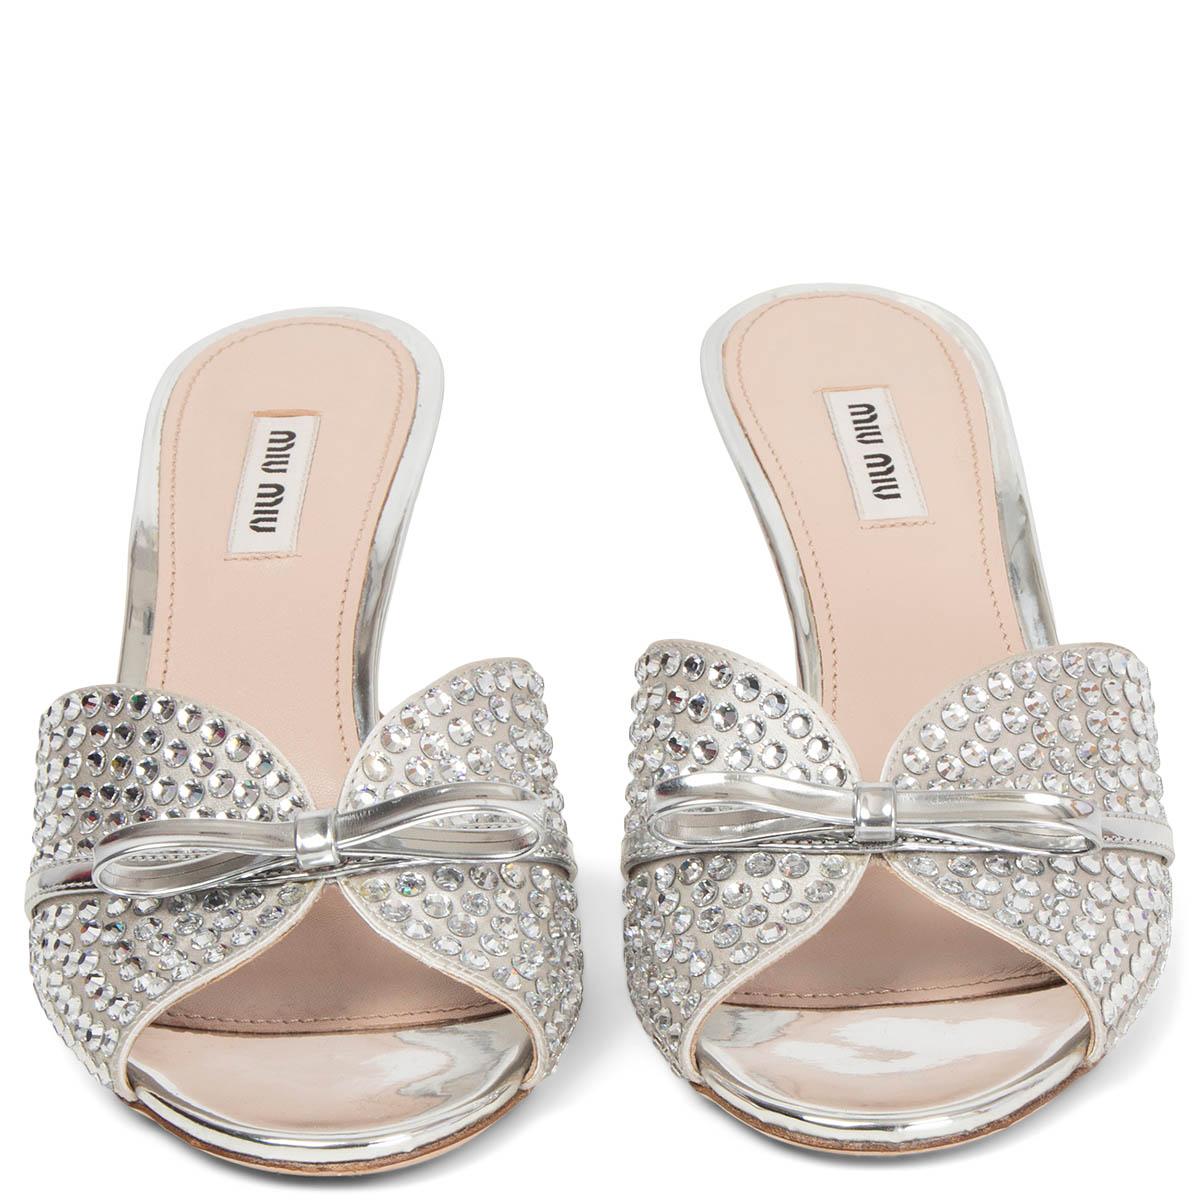 100% authentic Miu Miu Crystal Embellished Metallic Bow Mules in silver and nude leather, set on an architectural mirrored heel for a signature futuristic note. Have been worn and are in excellent condition. 

Measurements
Imprinted Size	39
Shoe